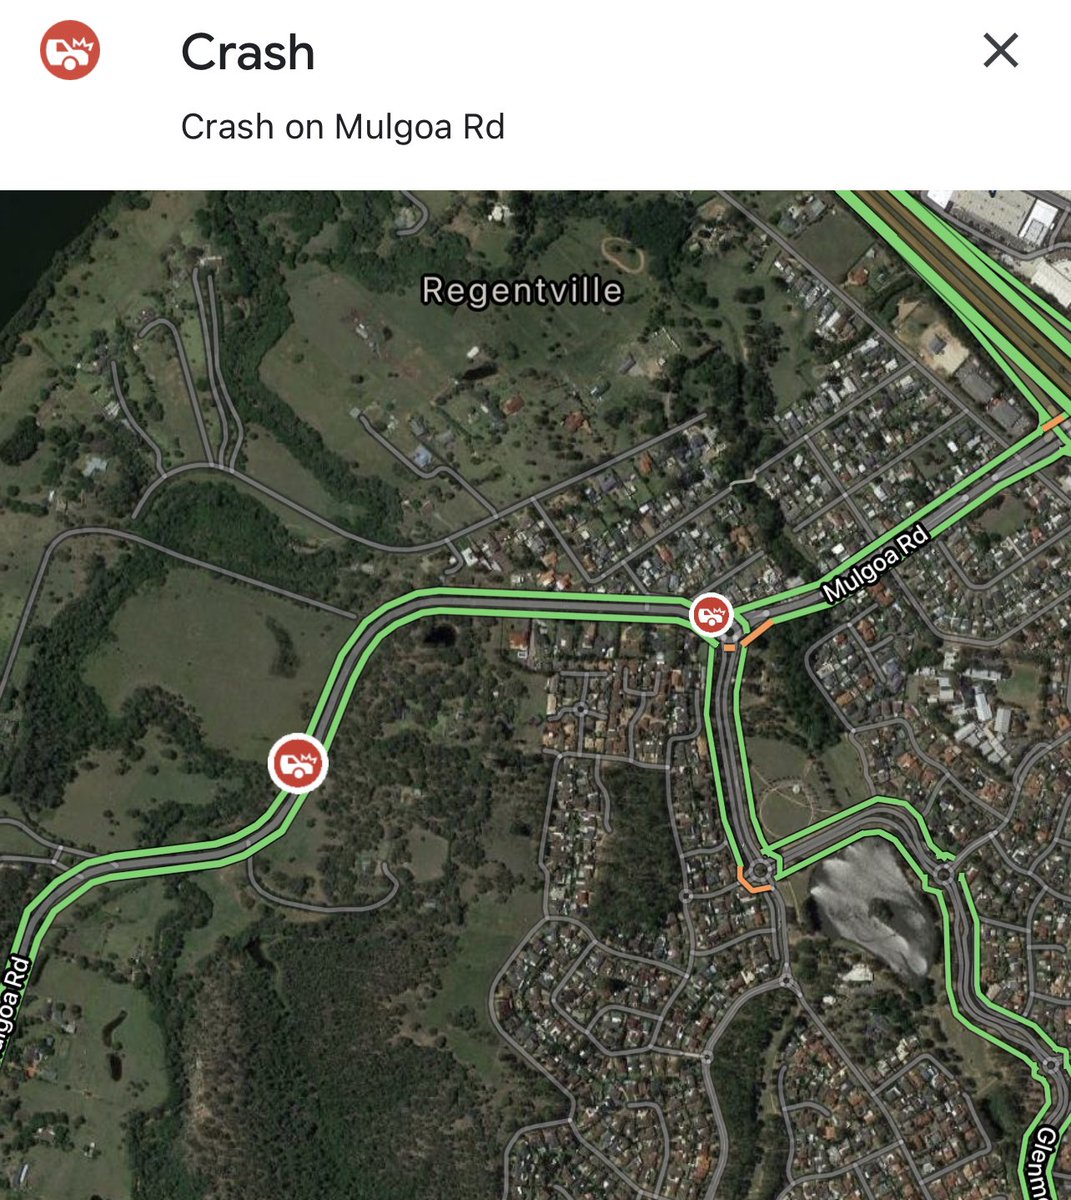 MULGOA | Combined services are in attendance at a head on crash on Mulgoa Rd. A rescue helicopter has landed nearby and #FRNSW crews will continue to release the trapped driver of one car. @NSWAmbulance, @nswpolice and @NSWRFS are on scene. https://t.co/QdCUFFaZp1